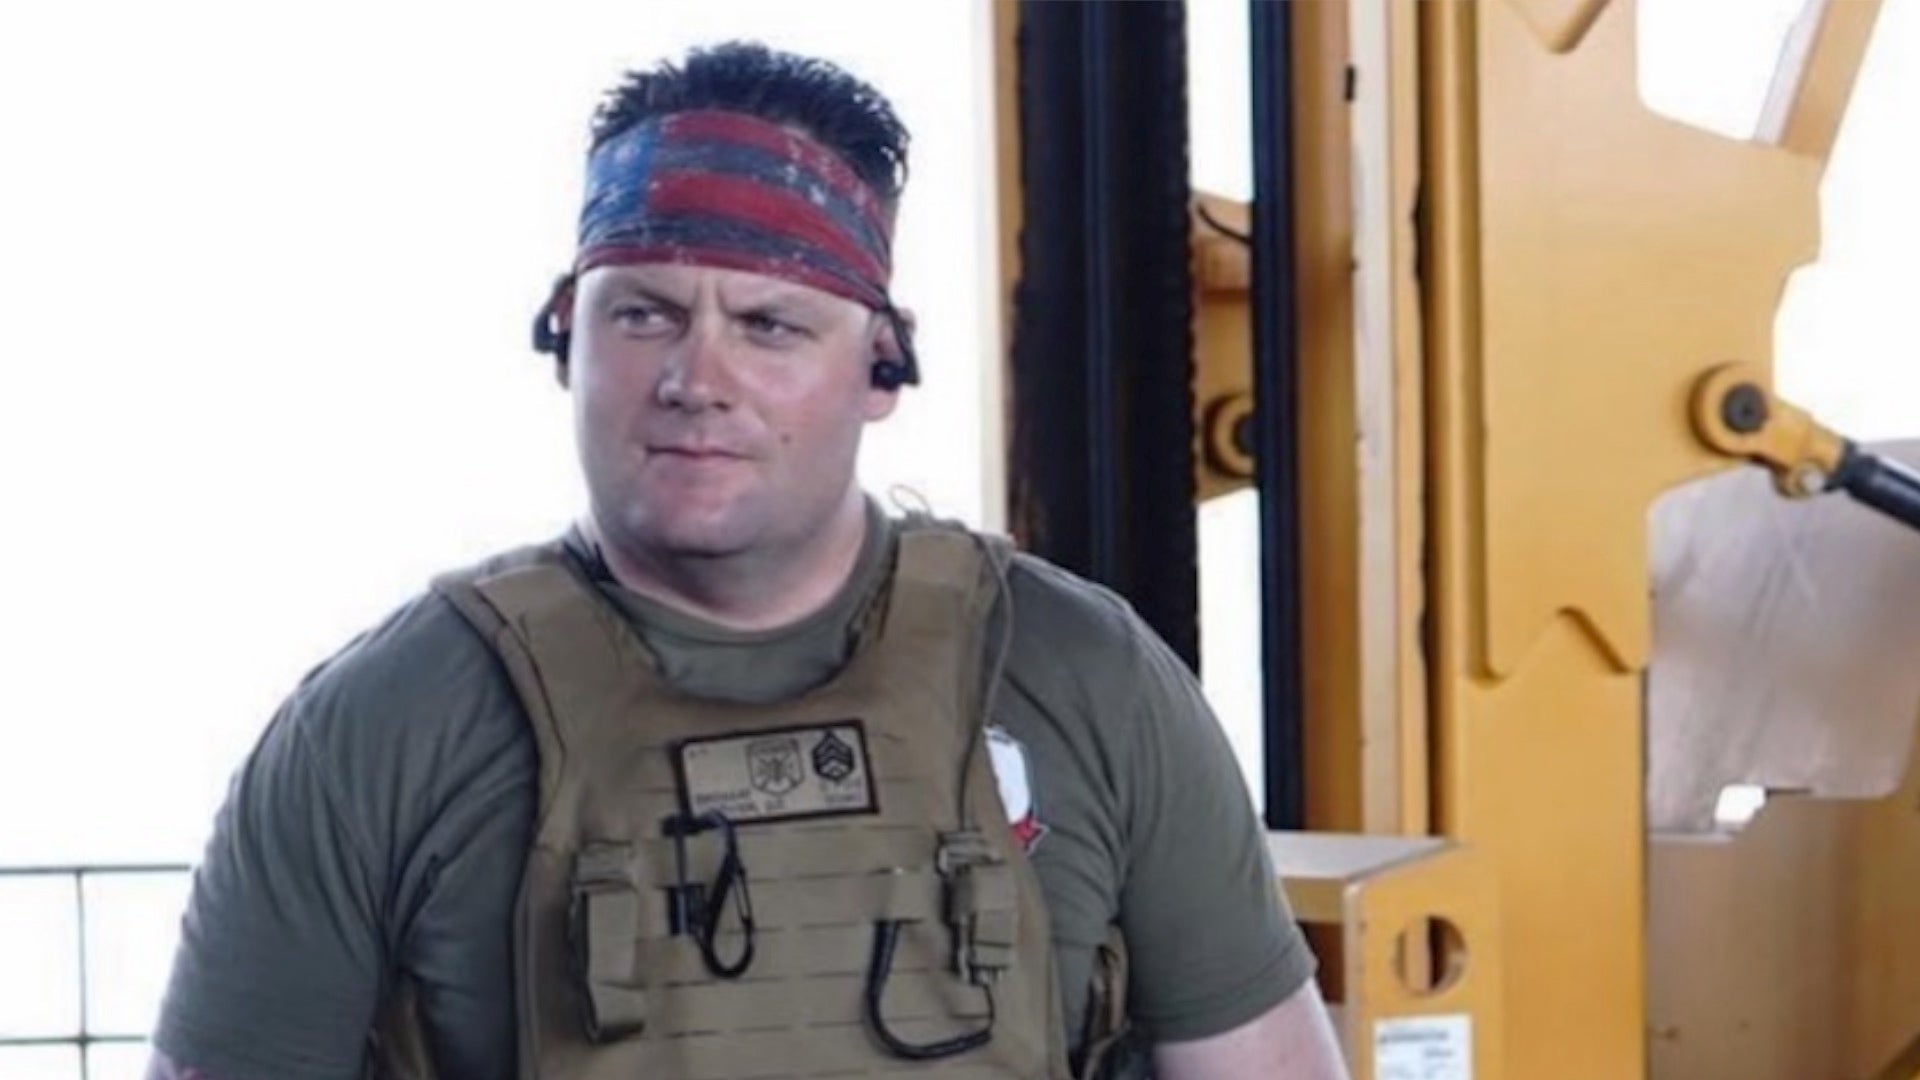 HEROES OF KABUL: Staff Sgt. Darin Taylor Hoover handed out ammo to